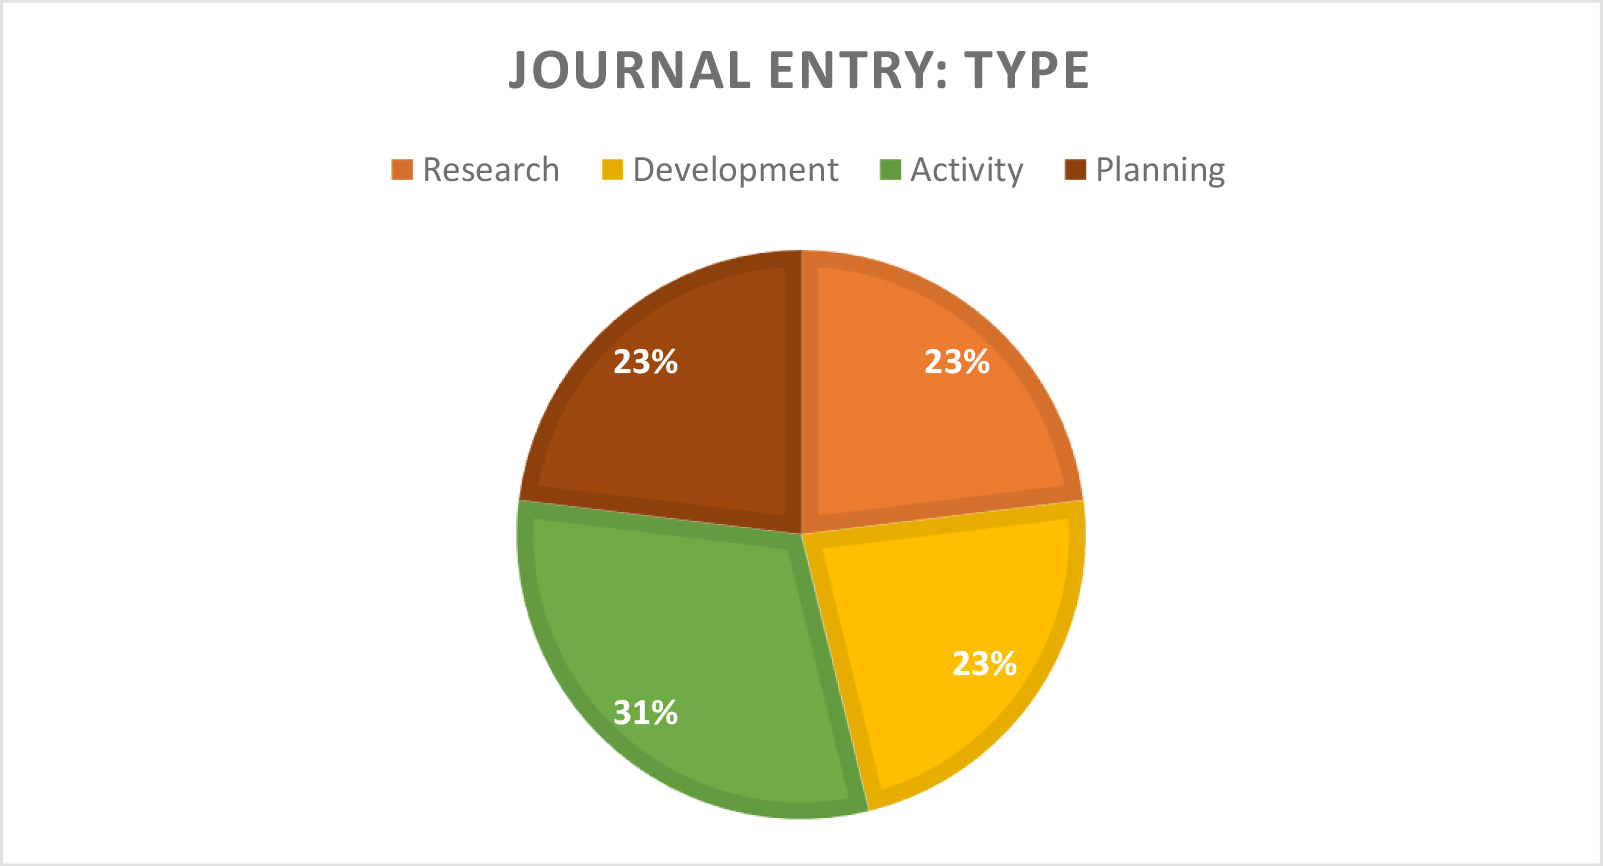 Pie chart of journal entry types: Research 23%, Development 23%, Activity 31%, Planning 23%.